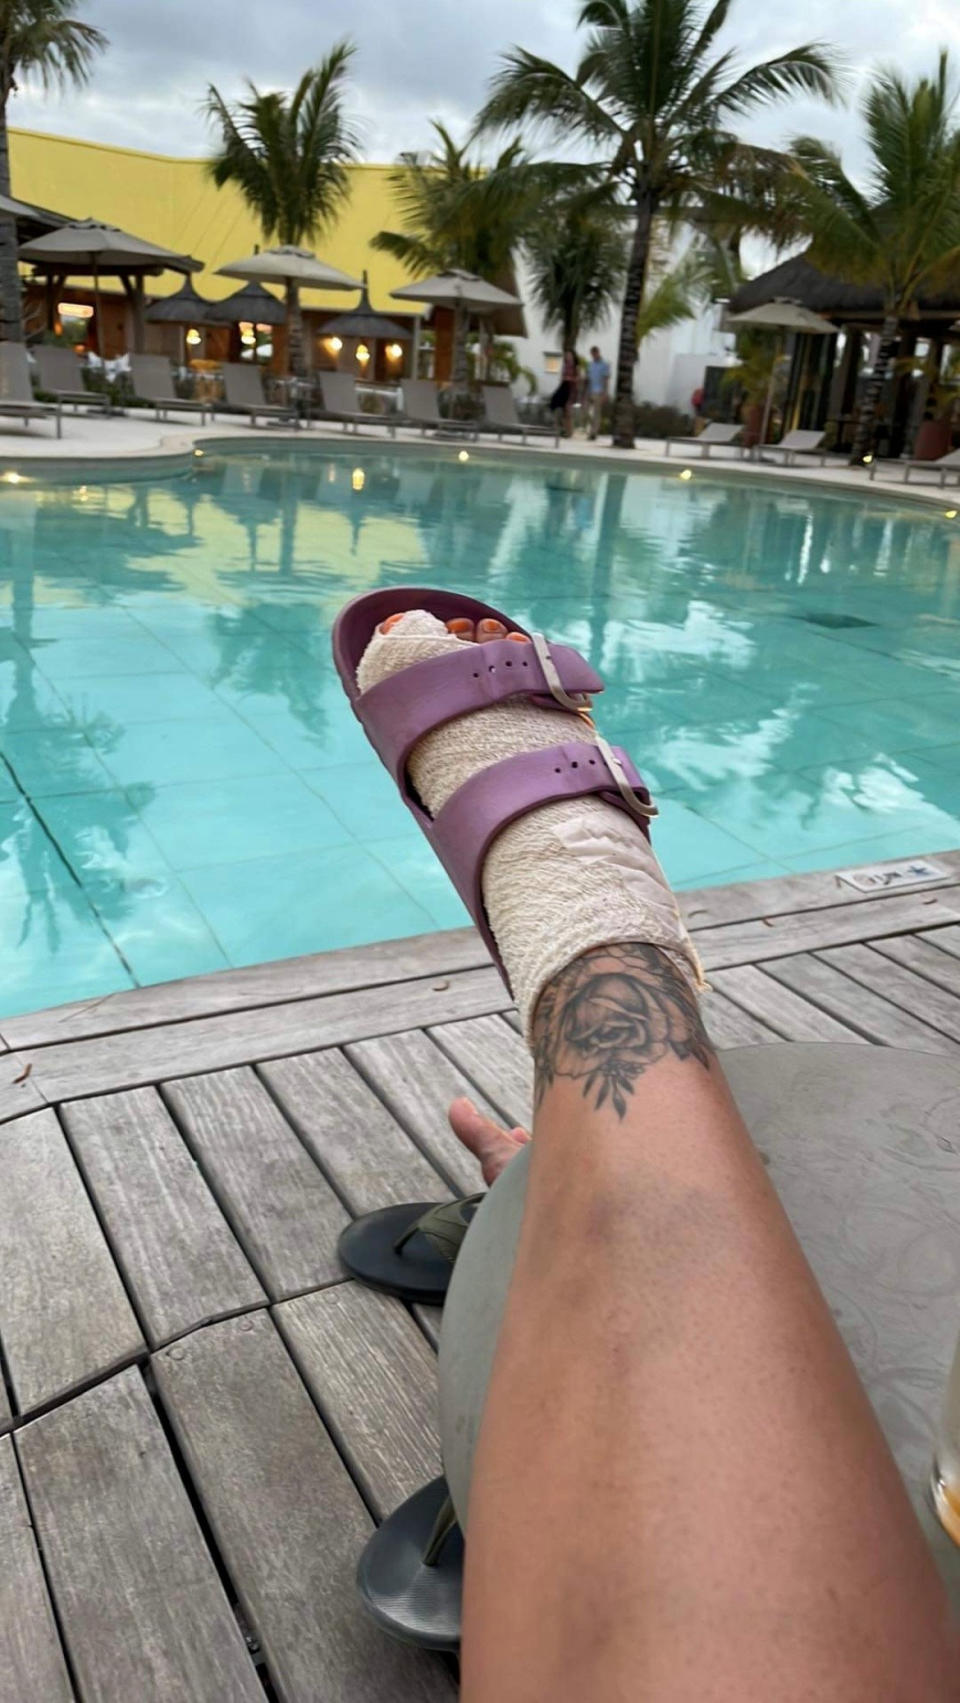 Amy Thomson spent the rest of her honeymoon unable to walk properly with a bandaged foot. (SWNS)